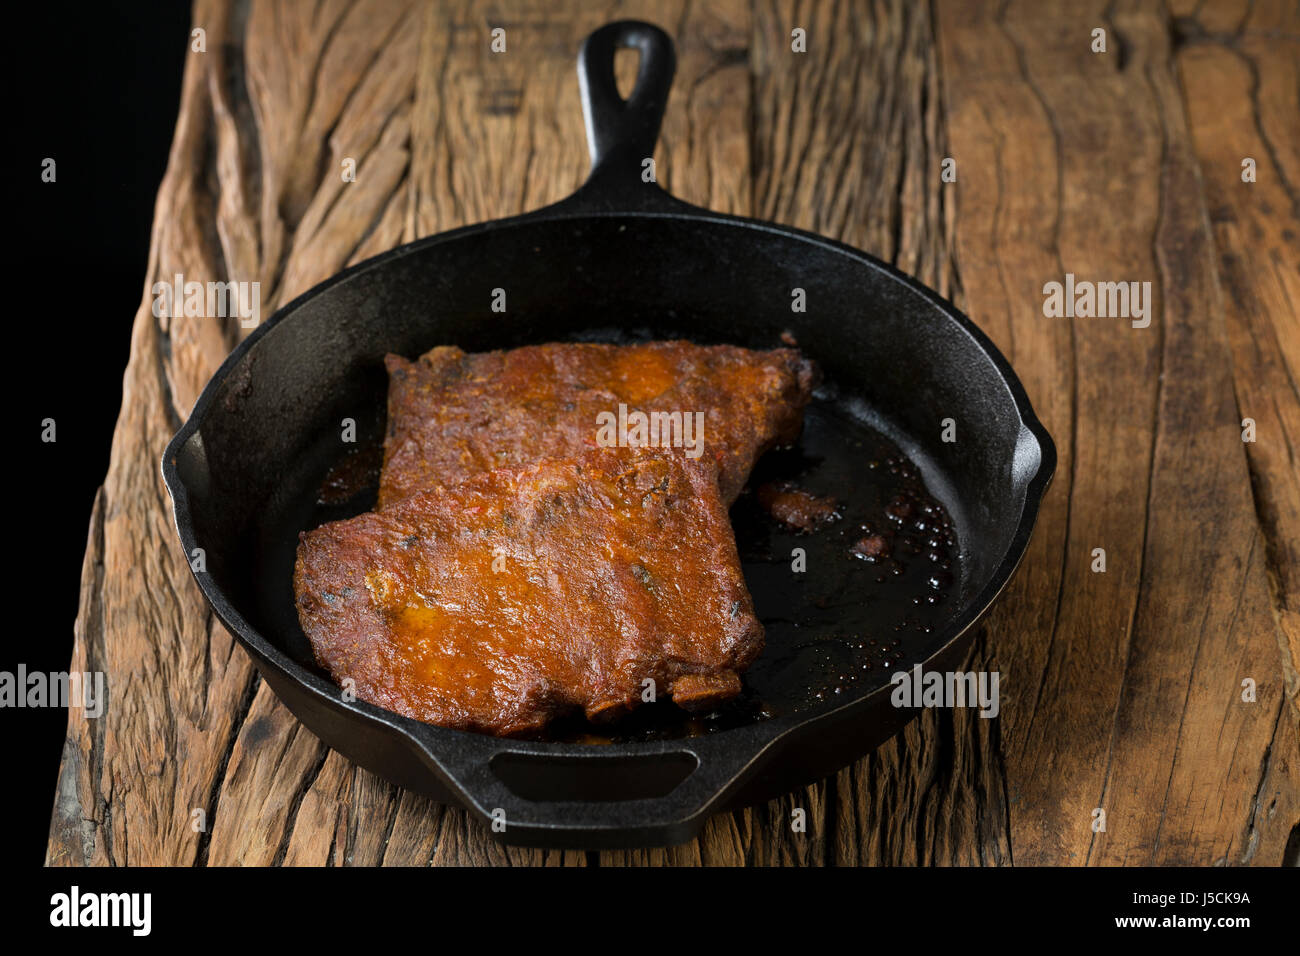 Roasted pork ribs in Barbecued sauce sitting on a rustic wooden table. Stock Photo